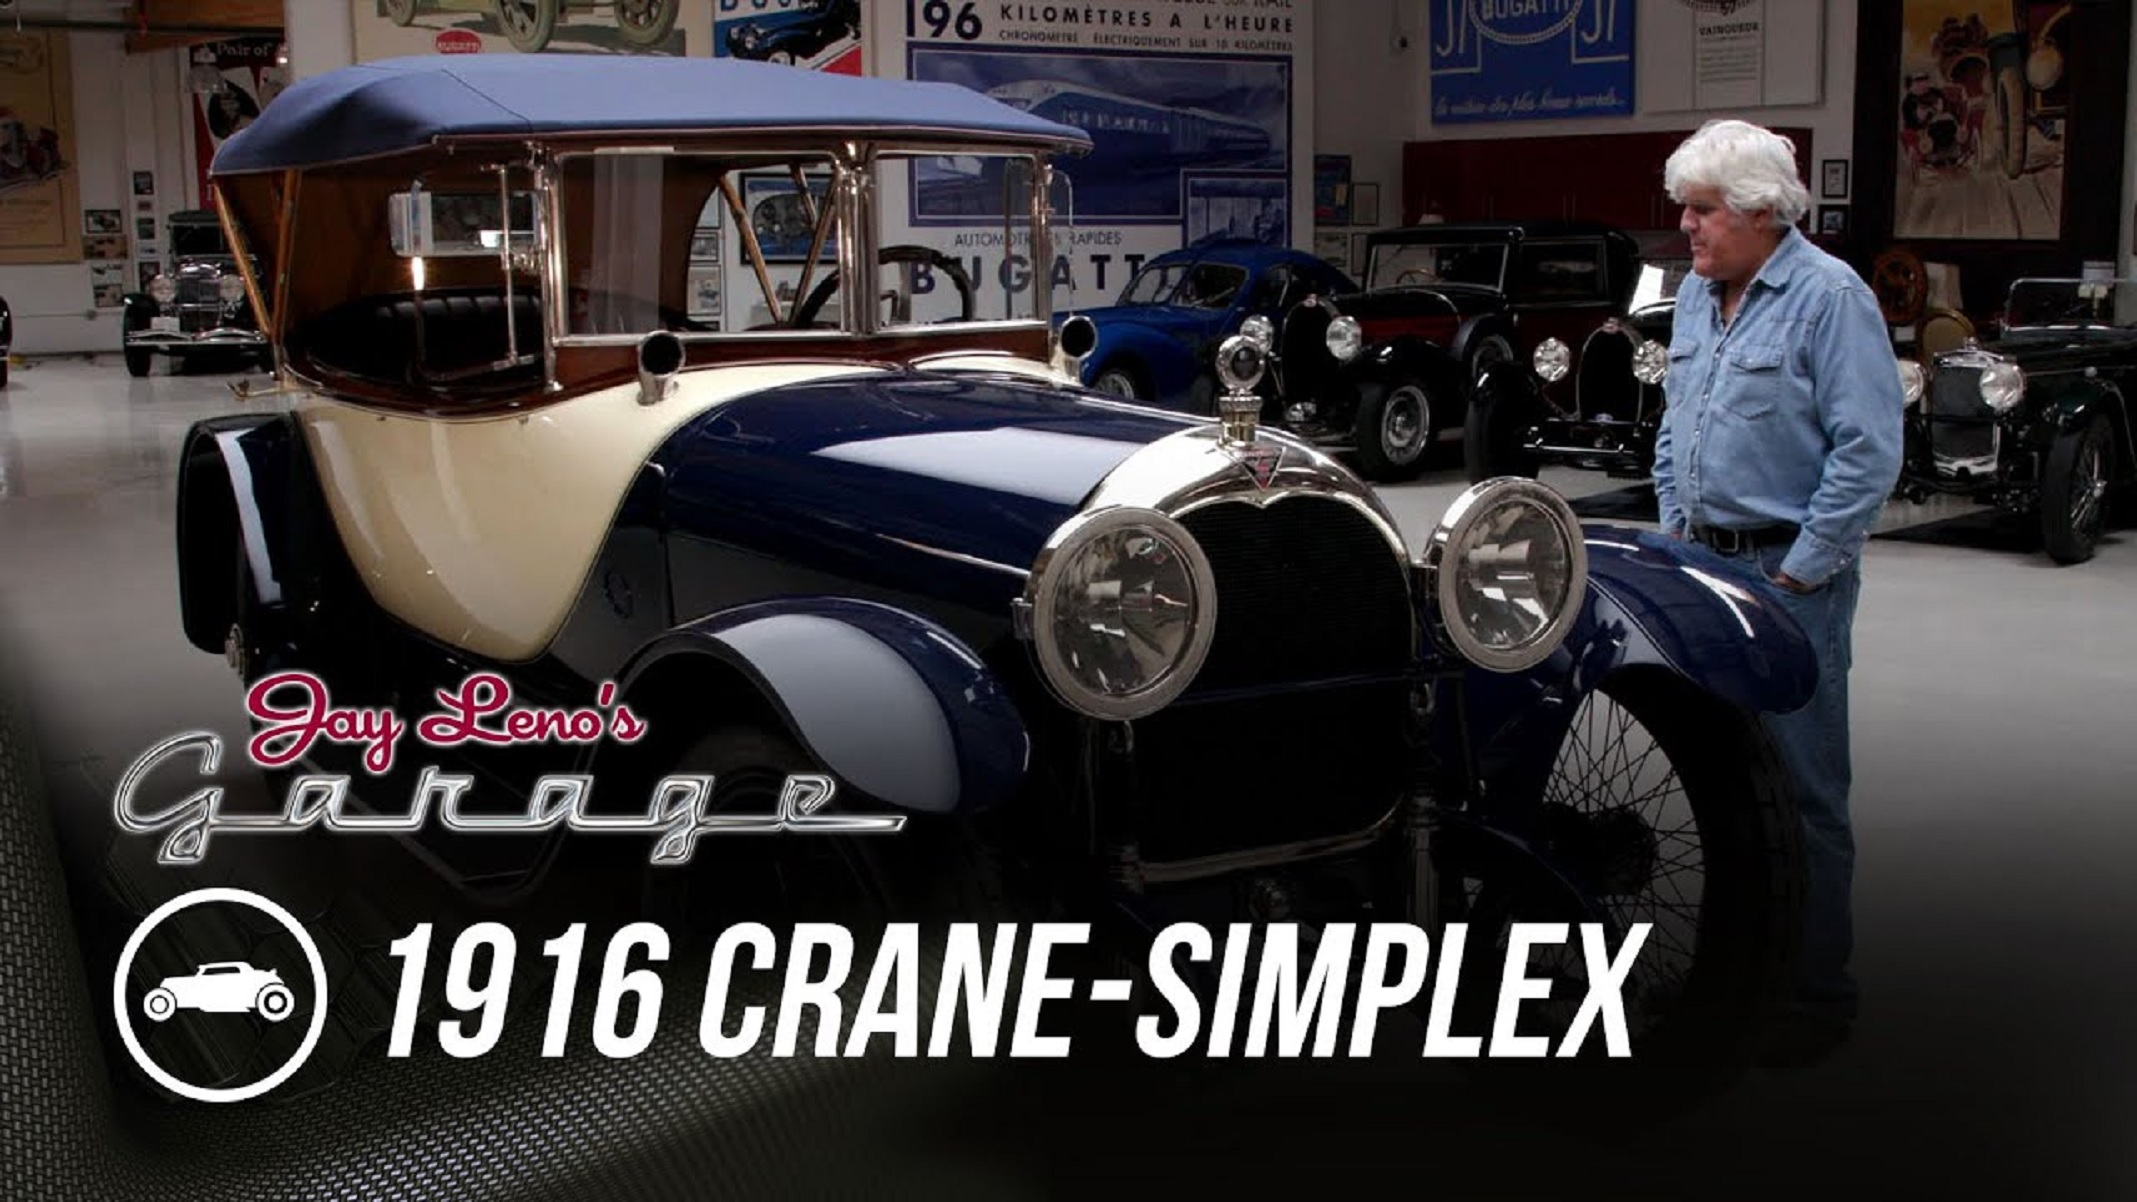 Jay Leno with his blue-and-cream 1916 Crane-Simplex Holbrook Skiff in his garage